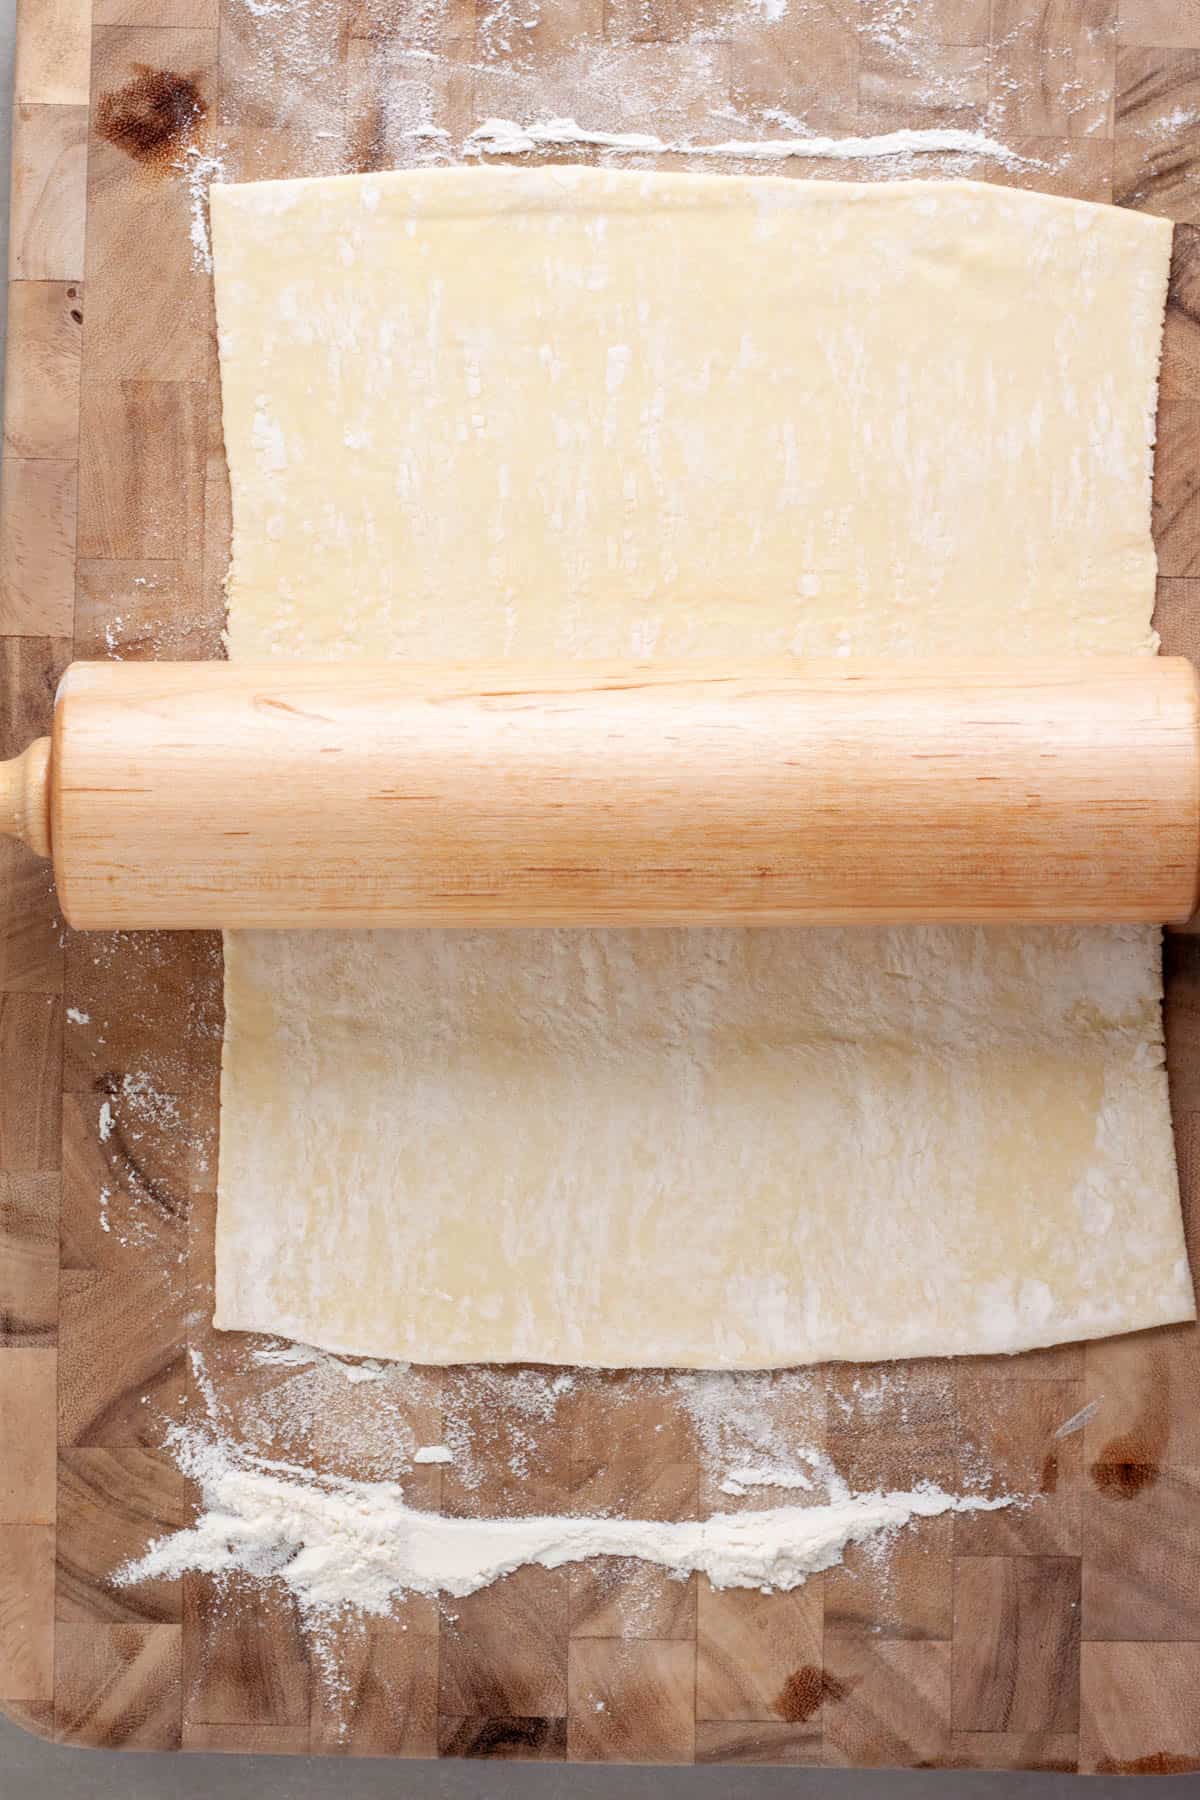 Puff pastry getting rolled on a wooden cutting board by a rolling pin.